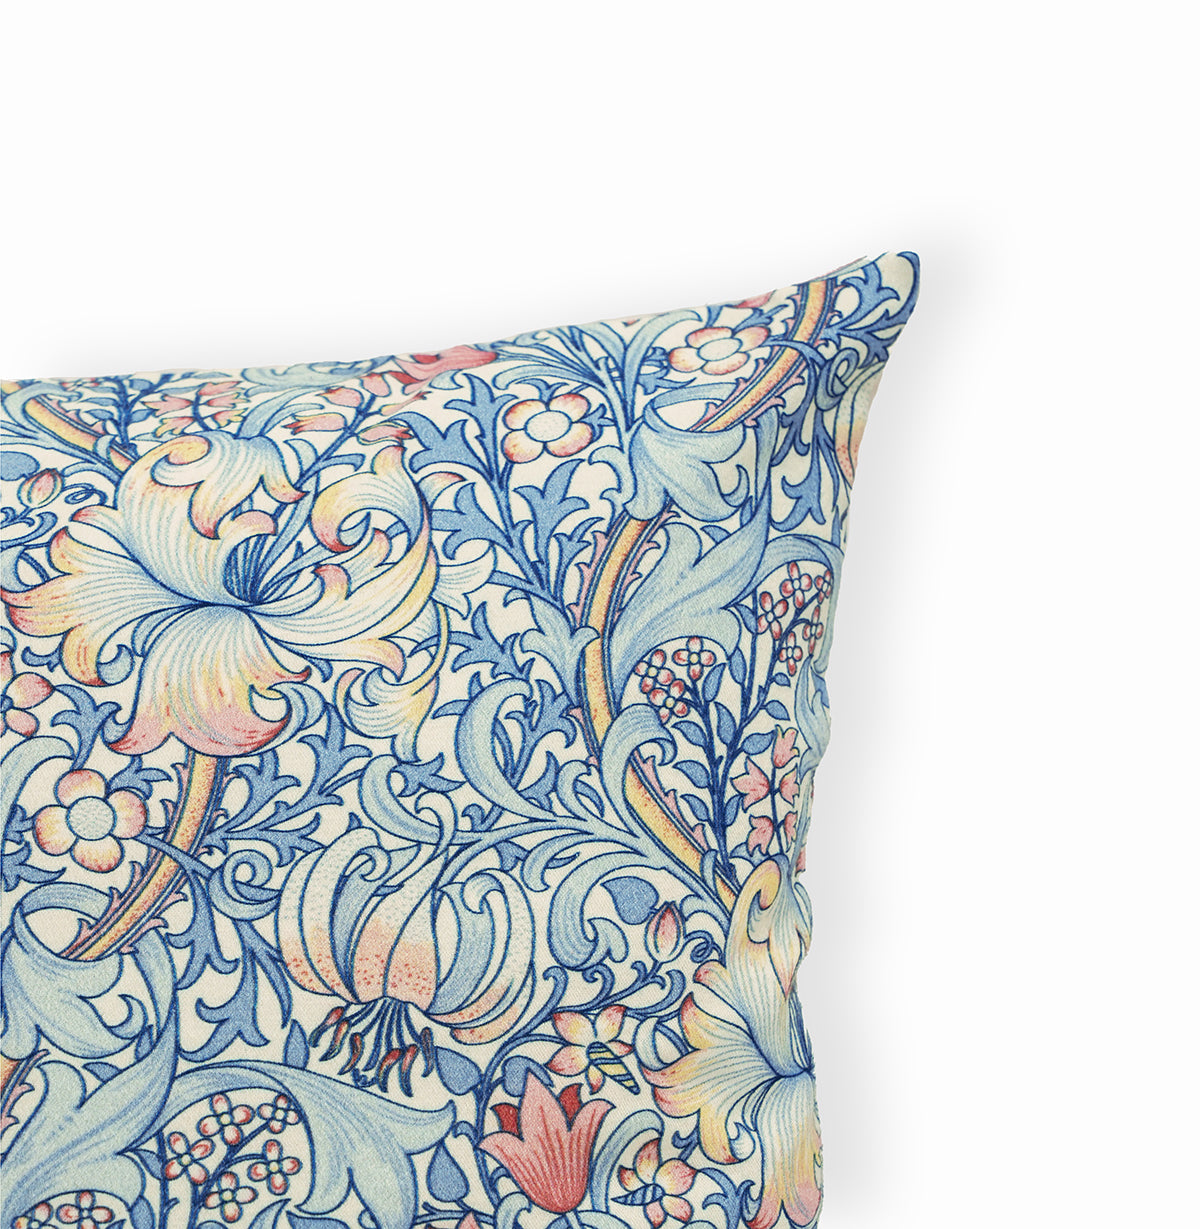 William Morris pillow cover, Blue Floral pattern, sizes available